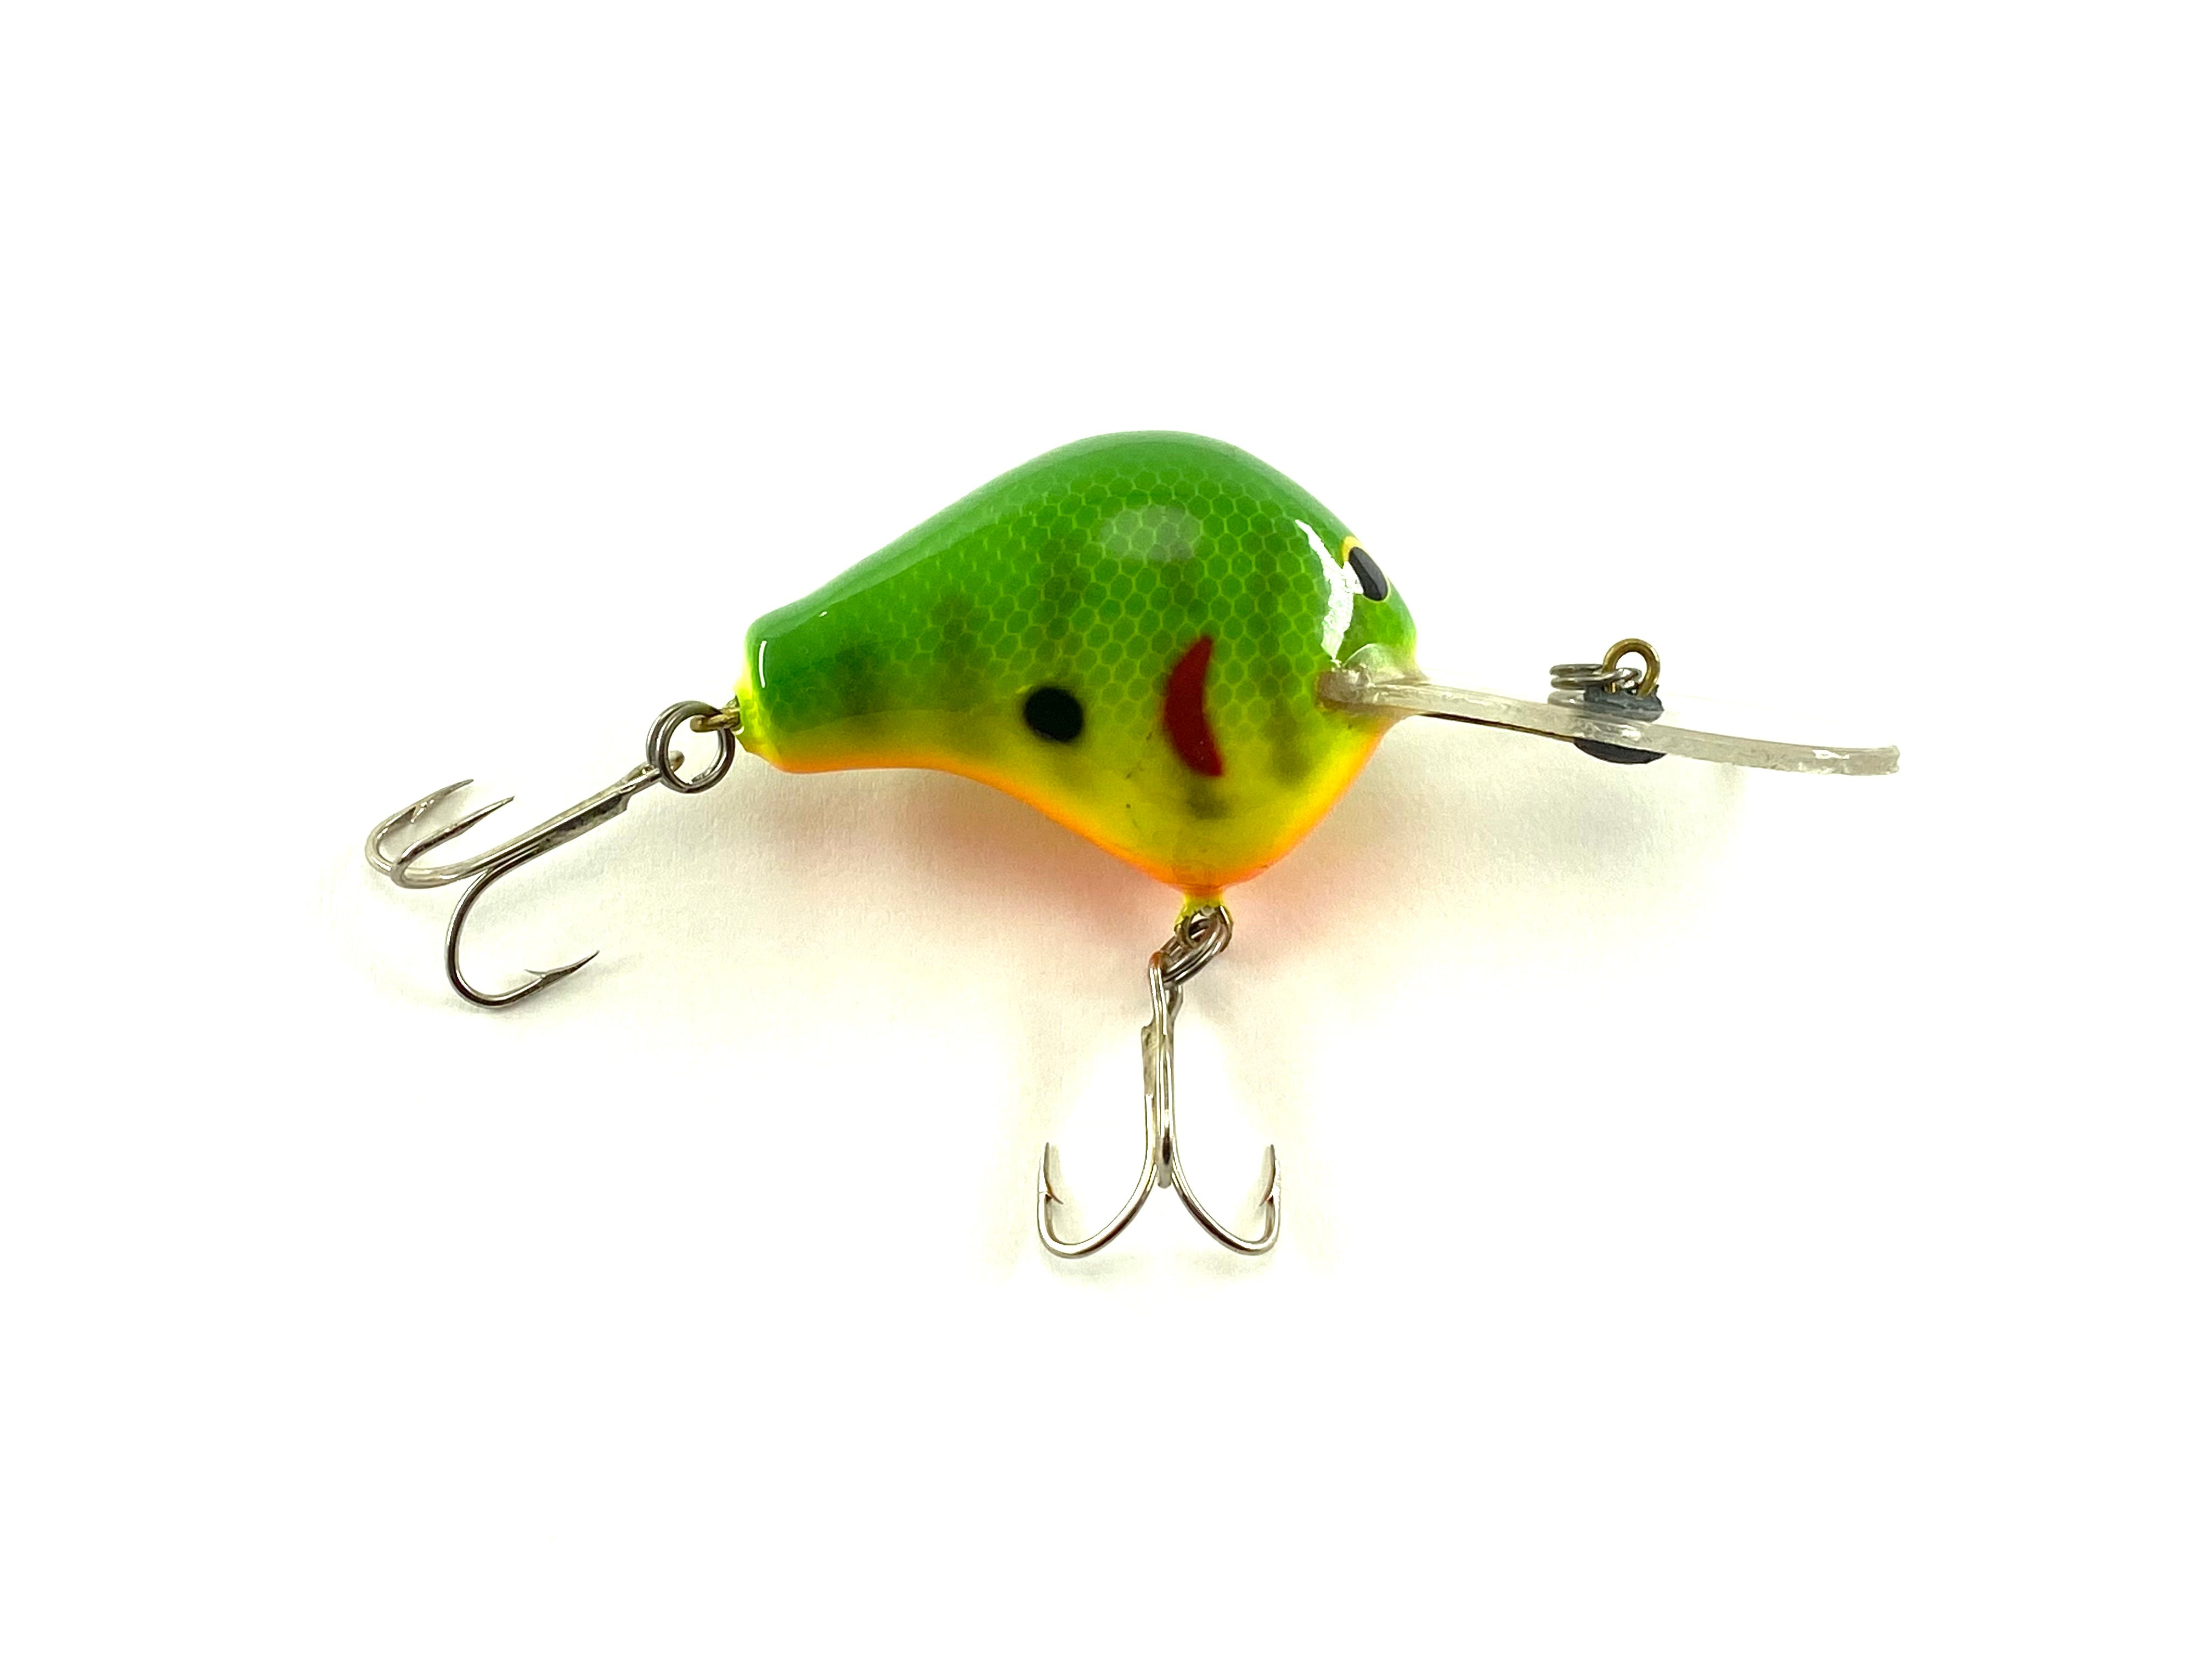 Bagley Bait Company Review 